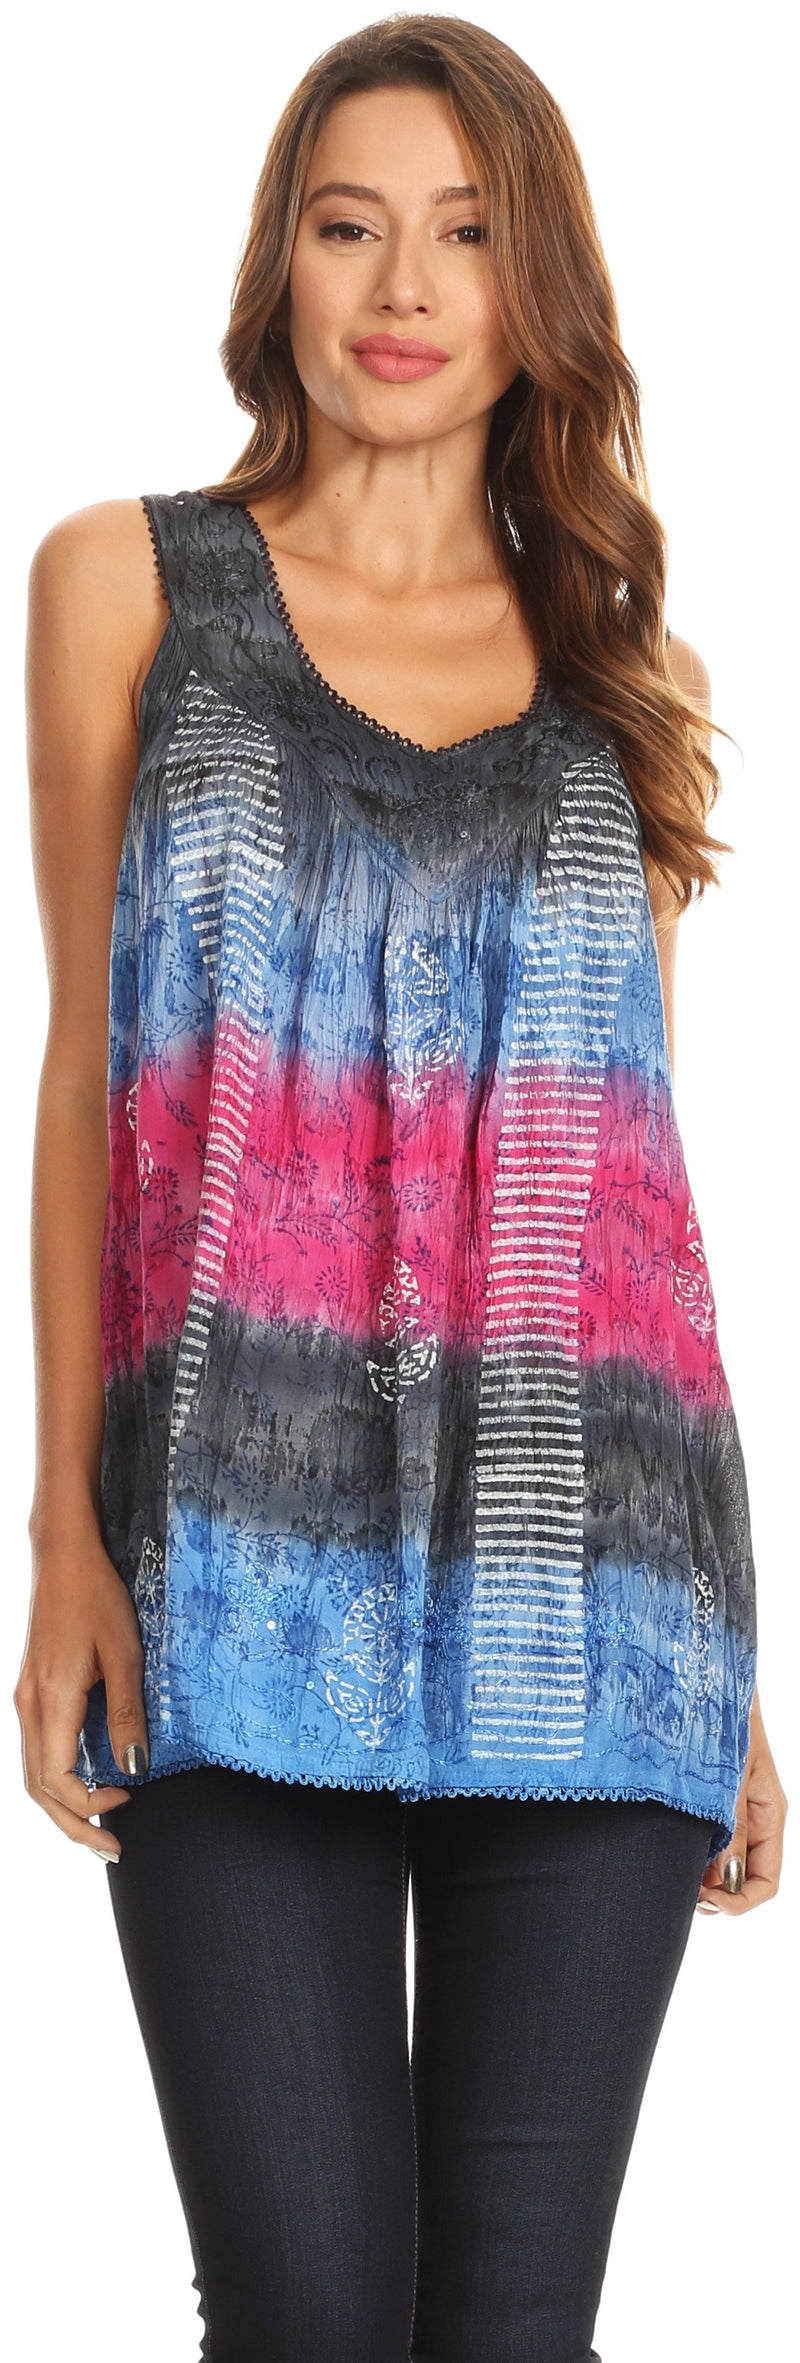 Sakkas Renee Dip Dye Floral Print Tank with Sequins and Embroidery